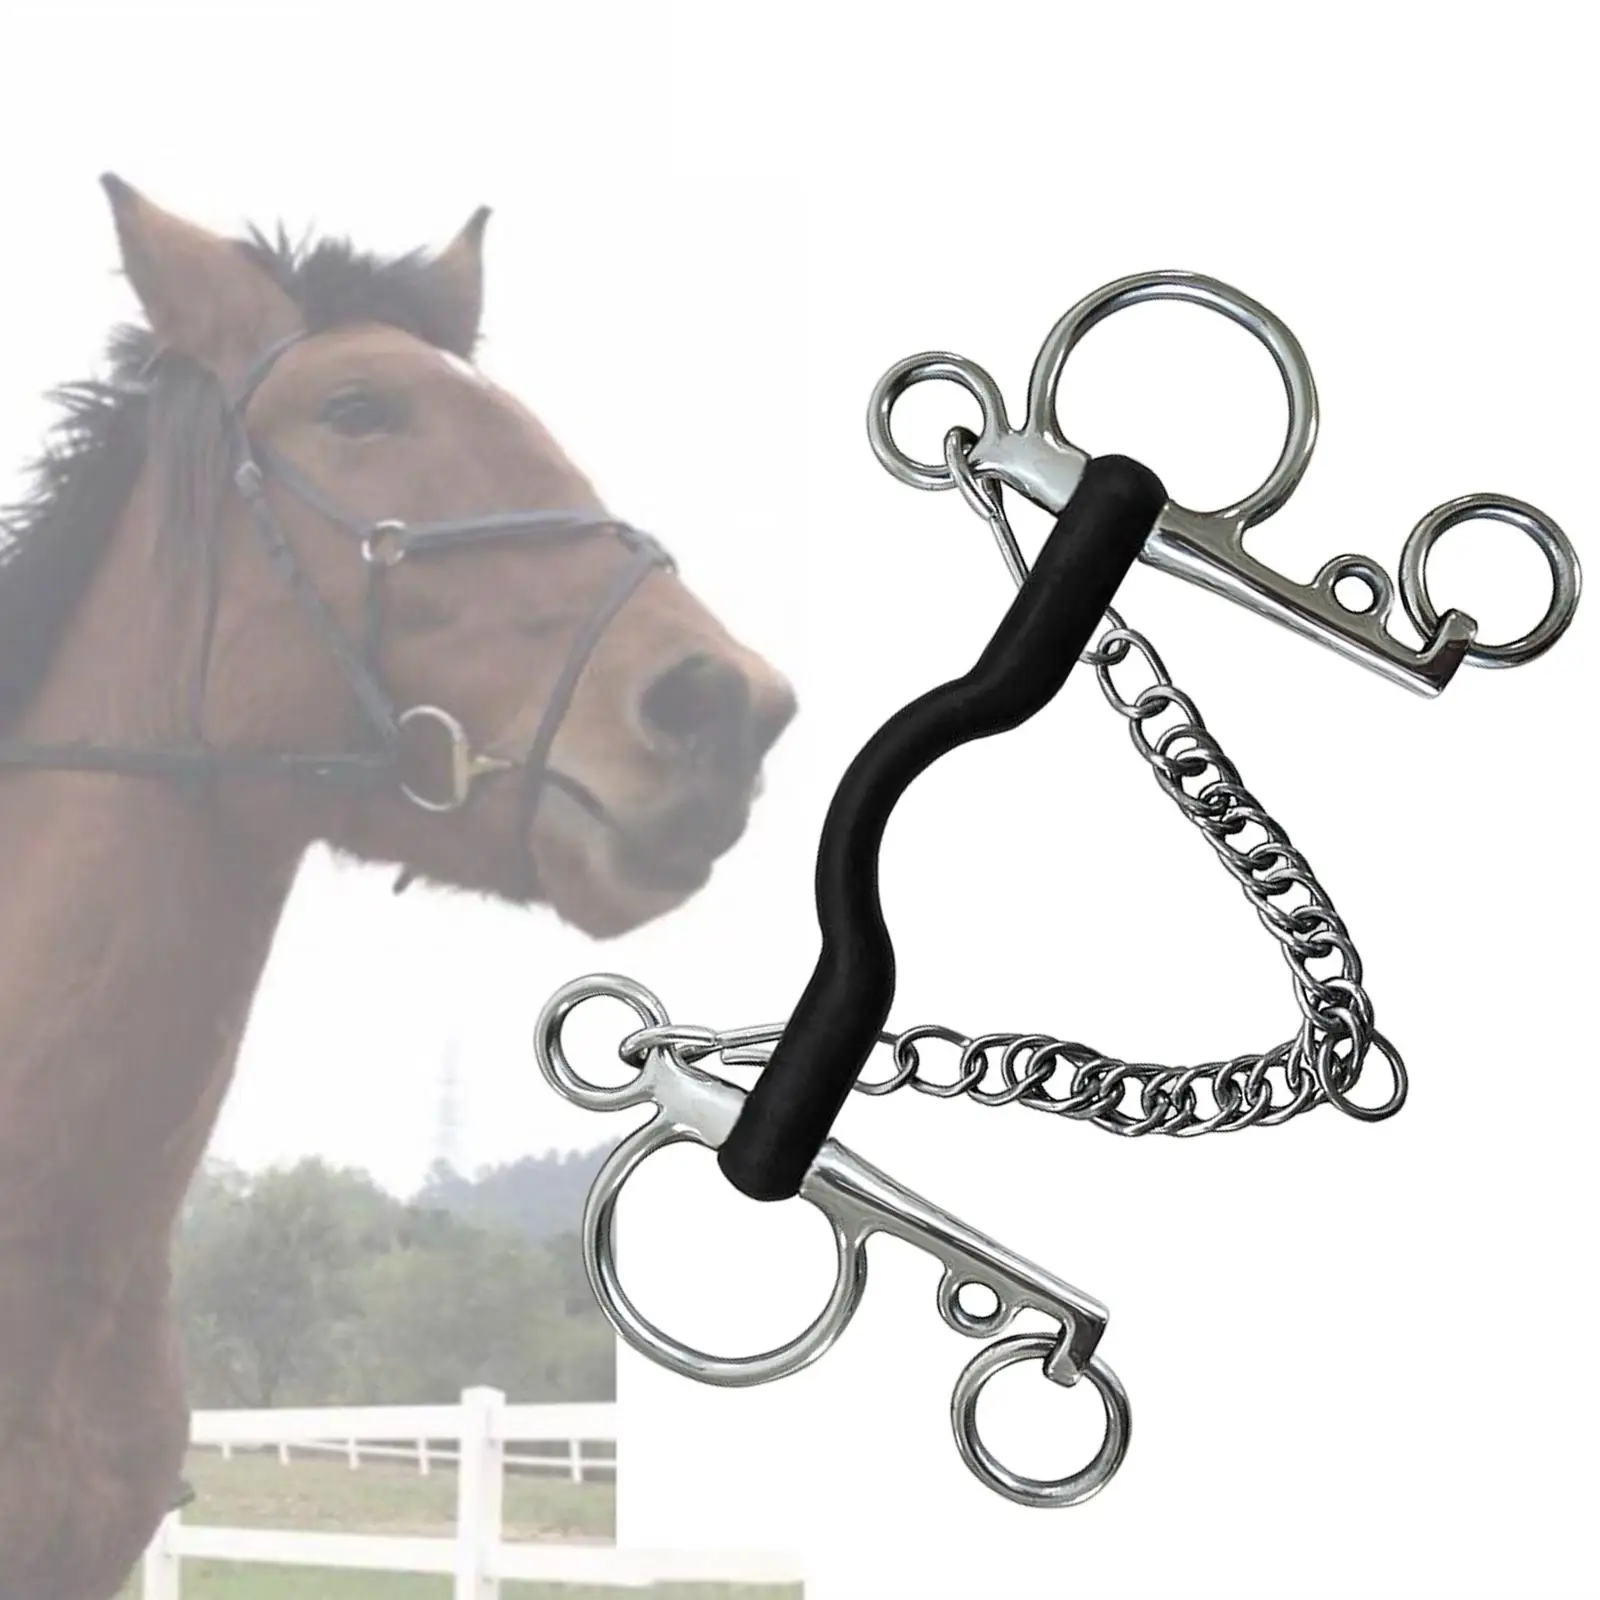 Horse Bit, Stainless Steel, with Curb Hook Chain, with Silver Trim, Cheek Mouth